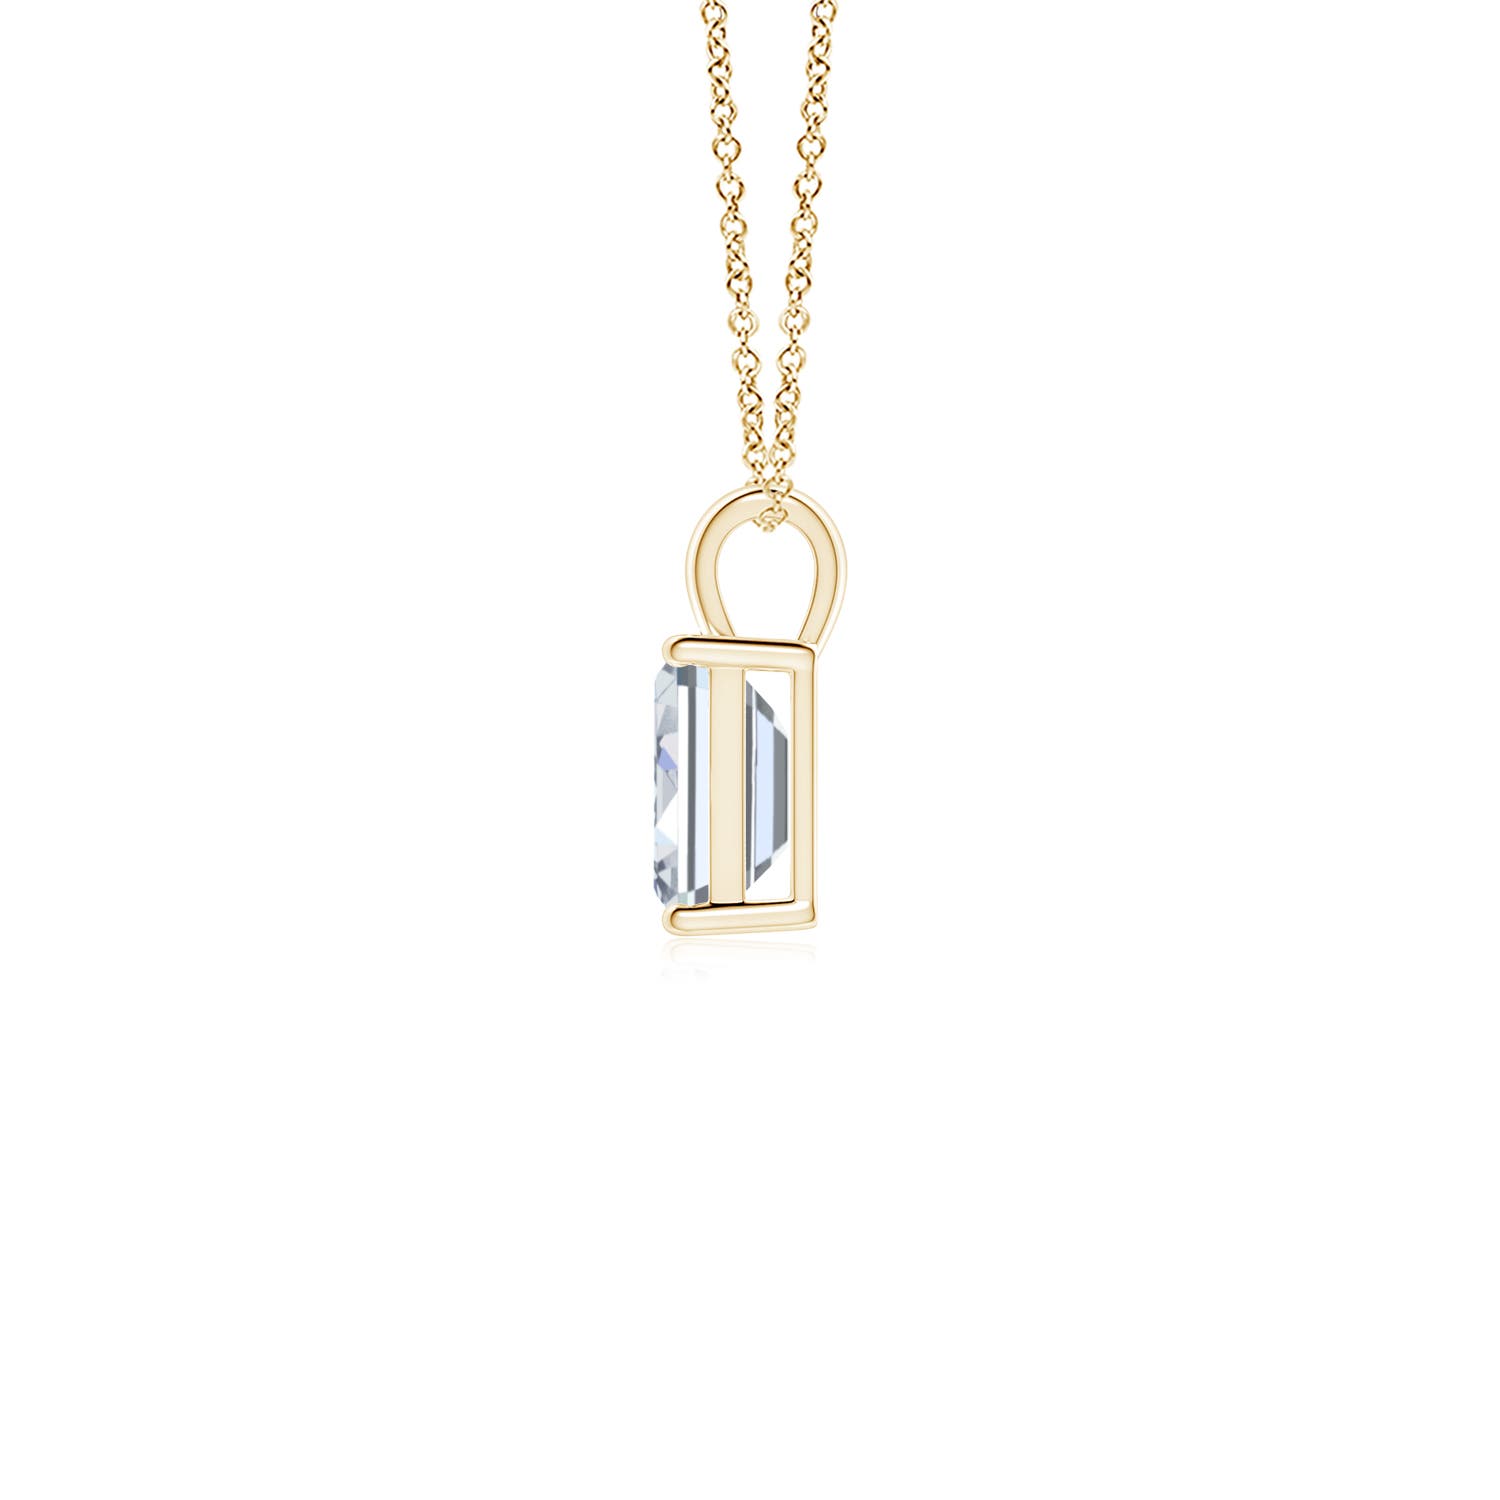 H, SI2 / 0.7 CT / 18 KT Yellow Gold